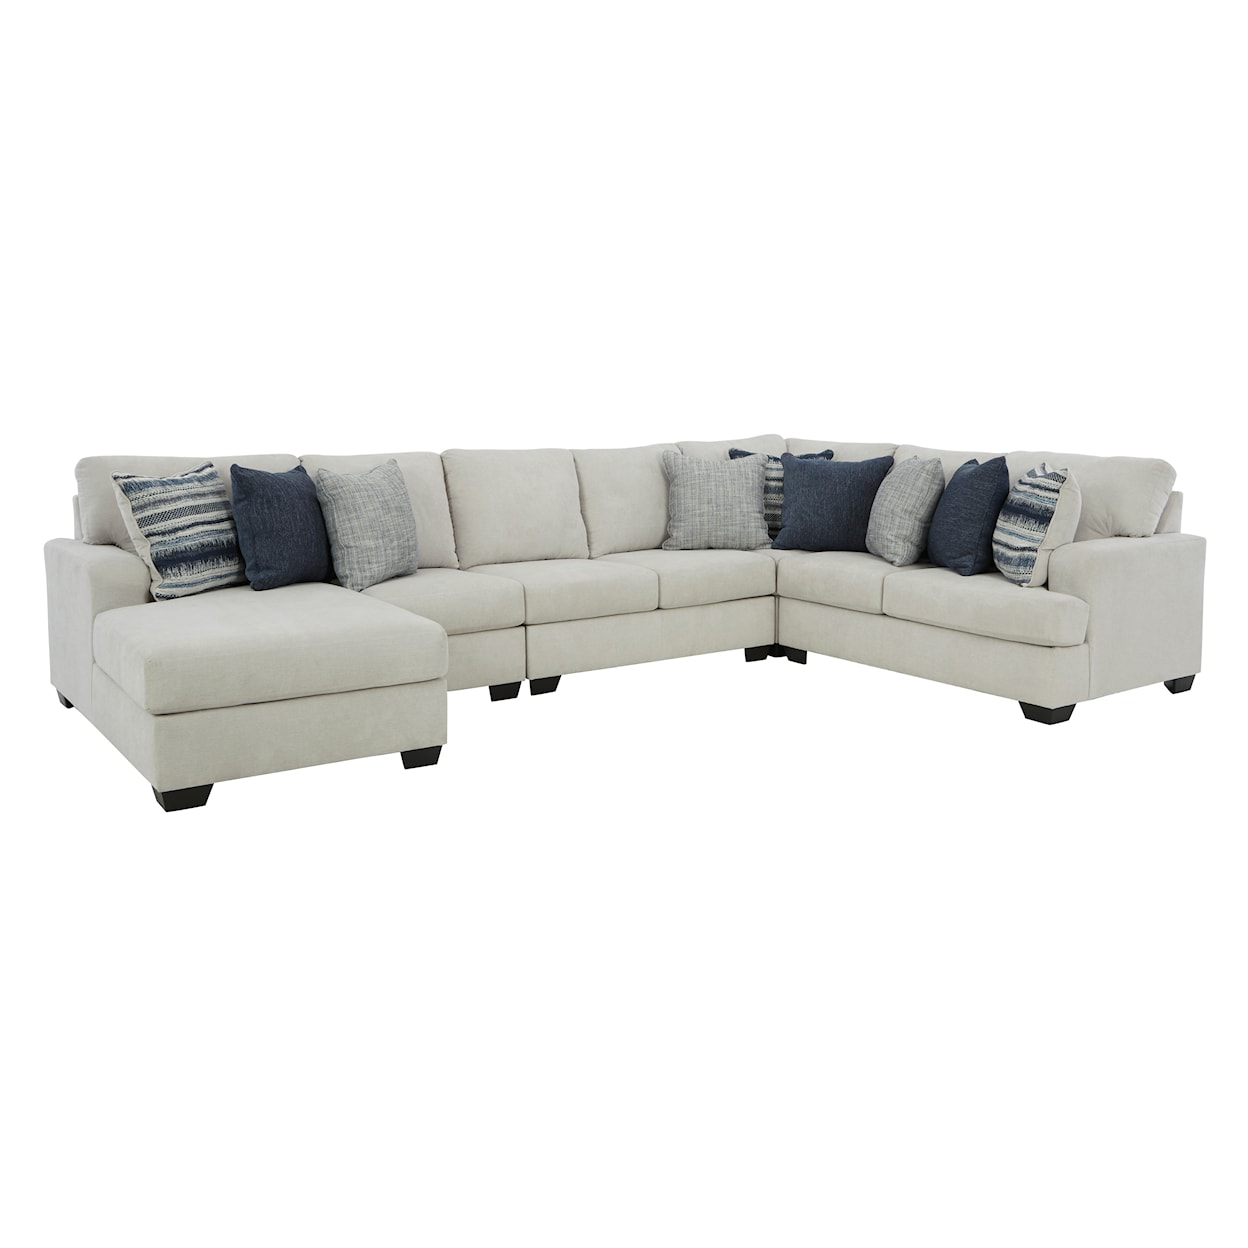 Ashley Furniture Benchcraft Lowder 5-Piece Sectional with Chaise